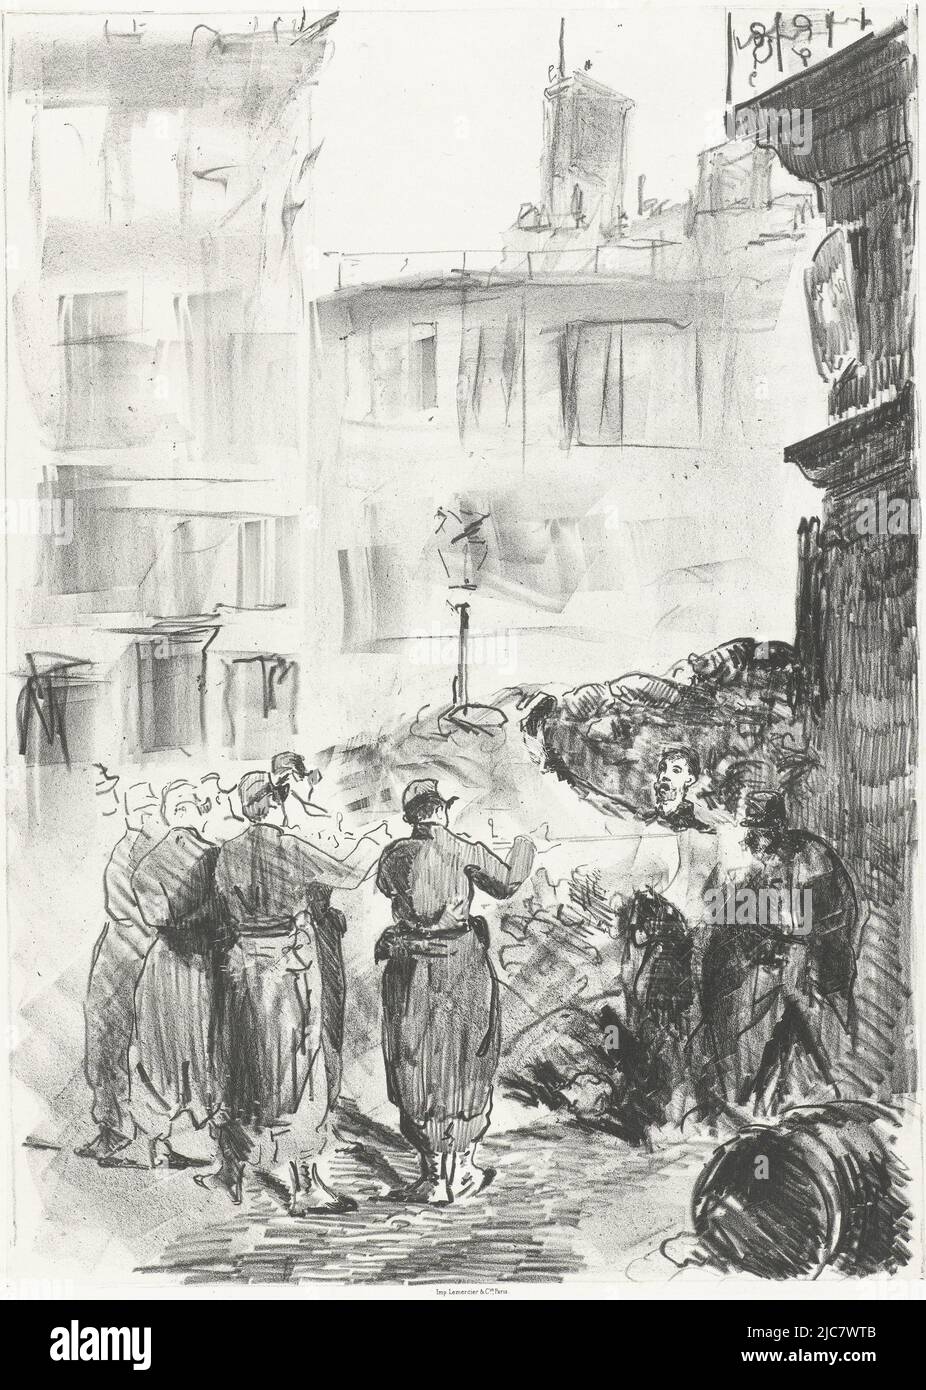 In a street of Paris at a blockade, during the Franco-Prussian War in 1871, three men, supporters of Paris Commune, are shot. The lively linework created by various applications of chalk to the stone give the impression of an on-the-spot work. Execution by firing squad of supporters of Paris Commune La Barricade, print maker: Edouard Manet, intermediary draughtsman: Edouard Manet, printer: Lemercier & Cie., (mentioned on object), Paris, 1871 Stock Photo